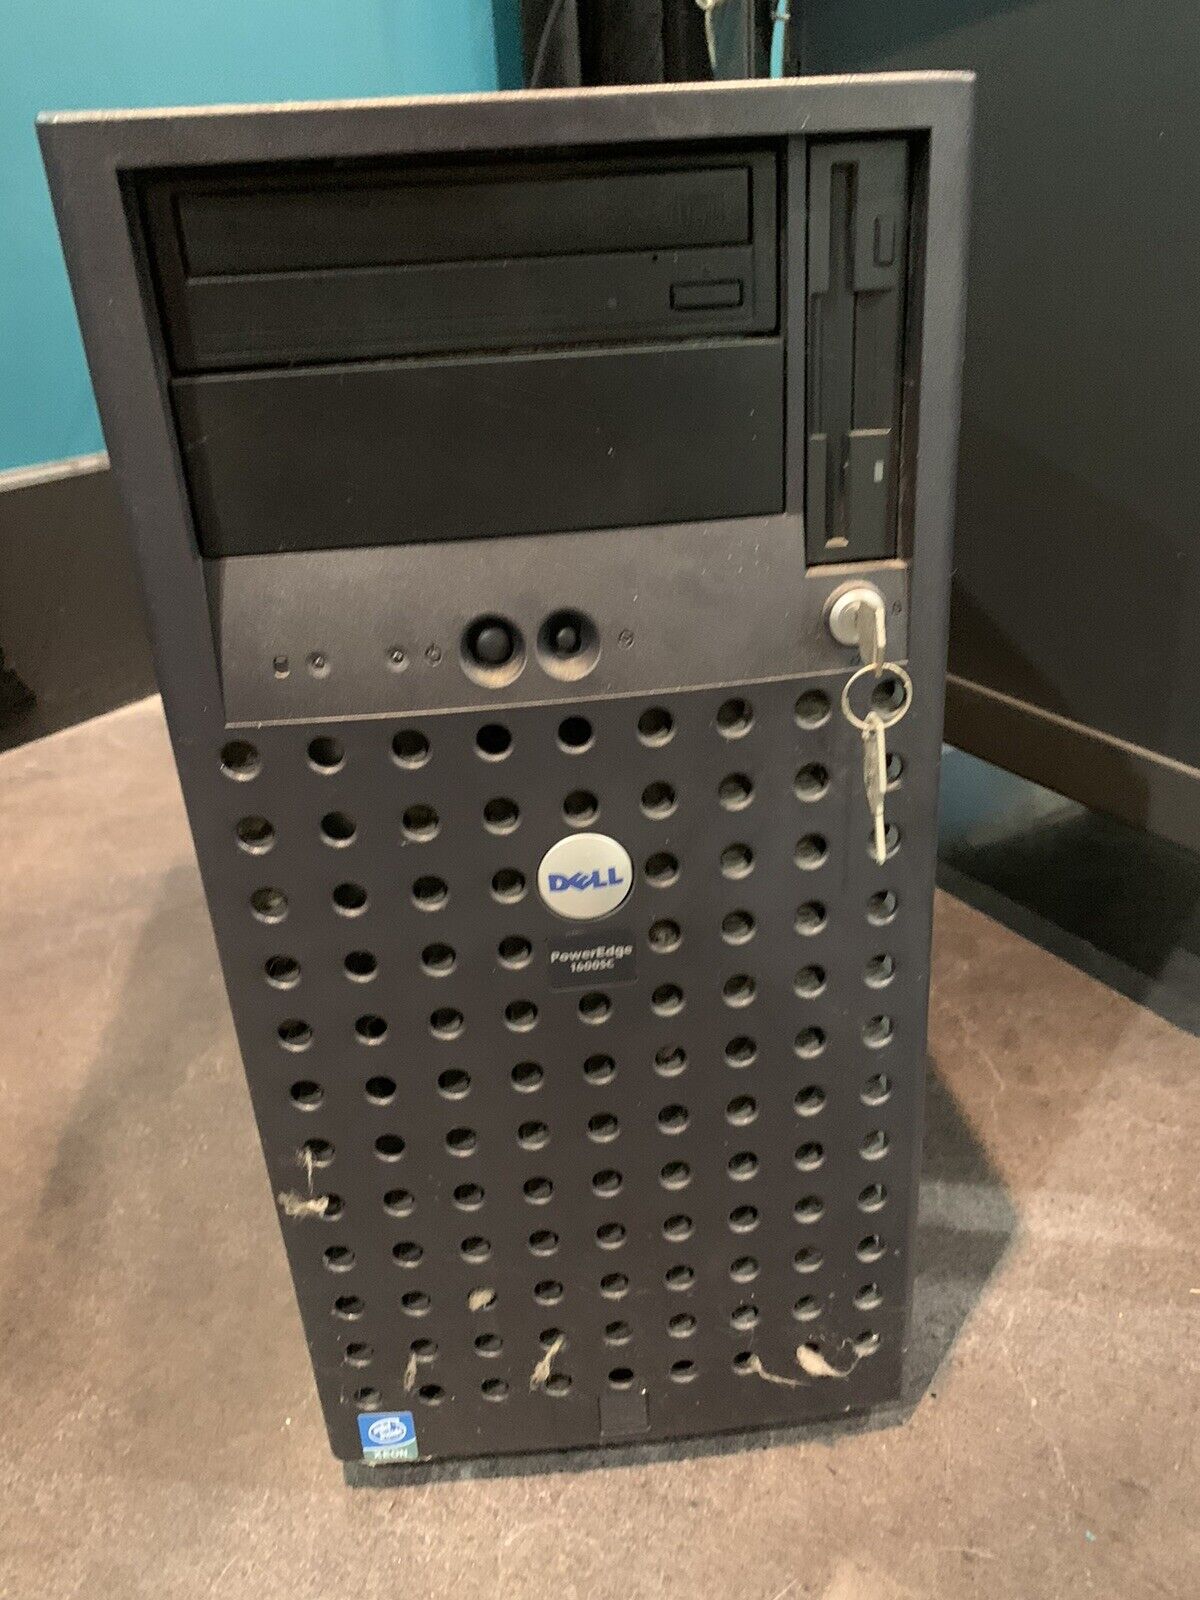 DELL POWEREDGE 1600SC SERVER. POWERS ON, NOT FULLY TESTED, (but likely works)